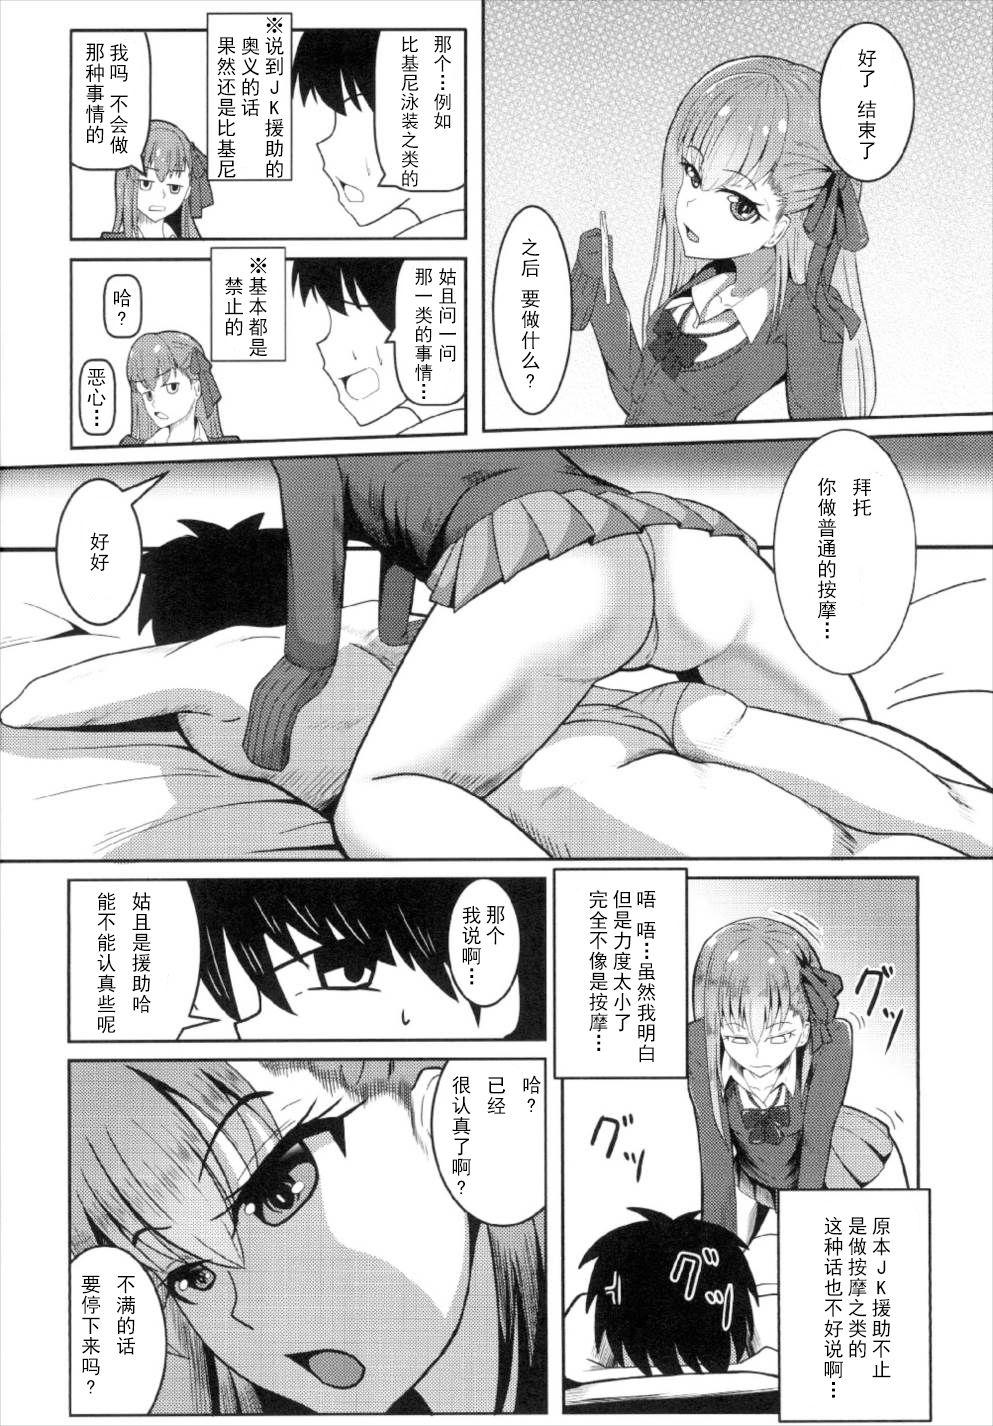 Heels Chaldea JK Collection Vol. 2 Meltlilith - Fate grand order Gay Skinny - Page 5